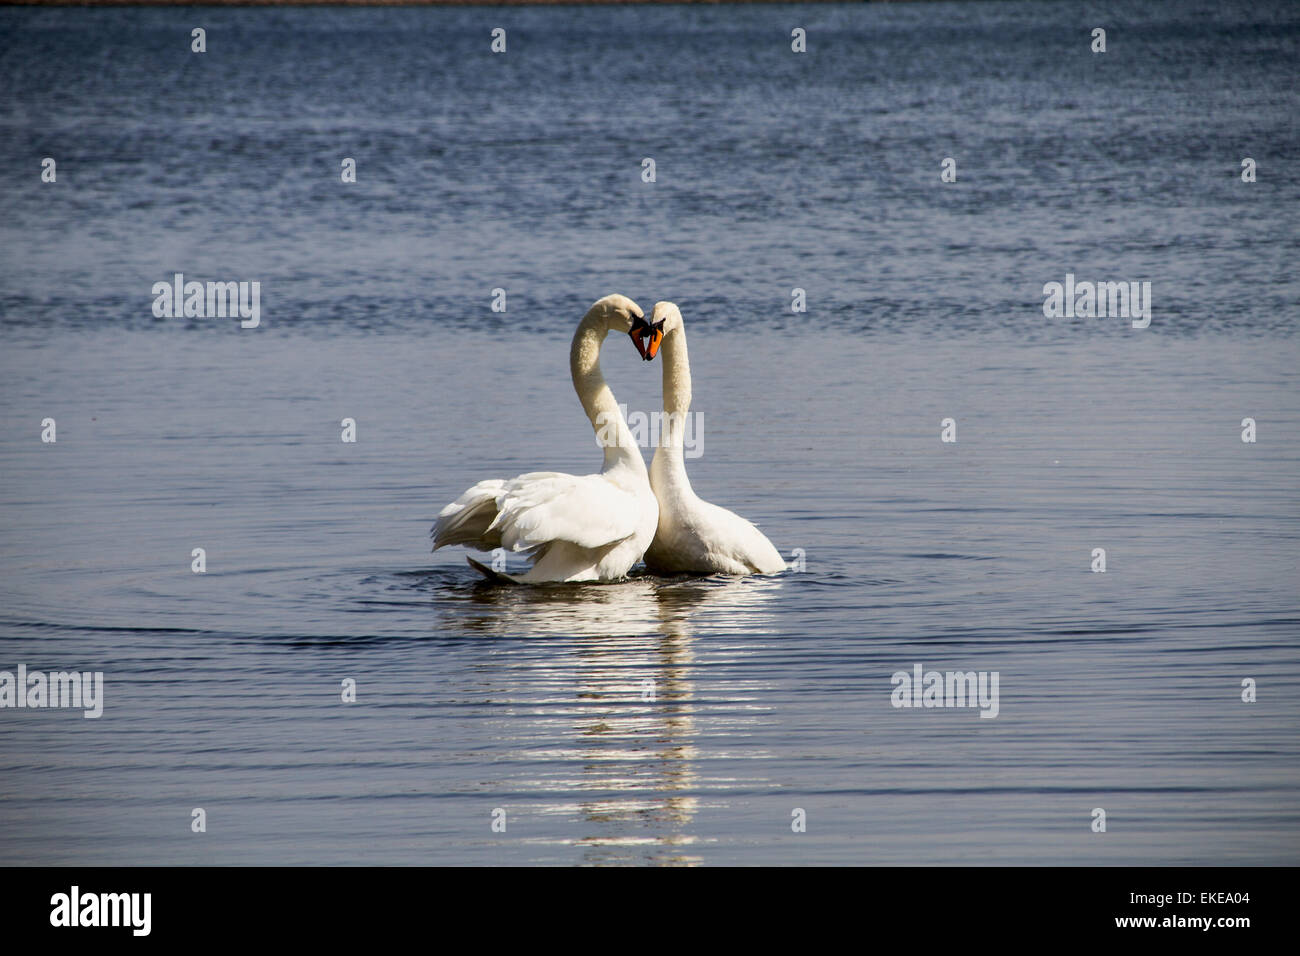 Mating Mute Swans on the Clatto Park pond in Dundee, UK Stock Photo